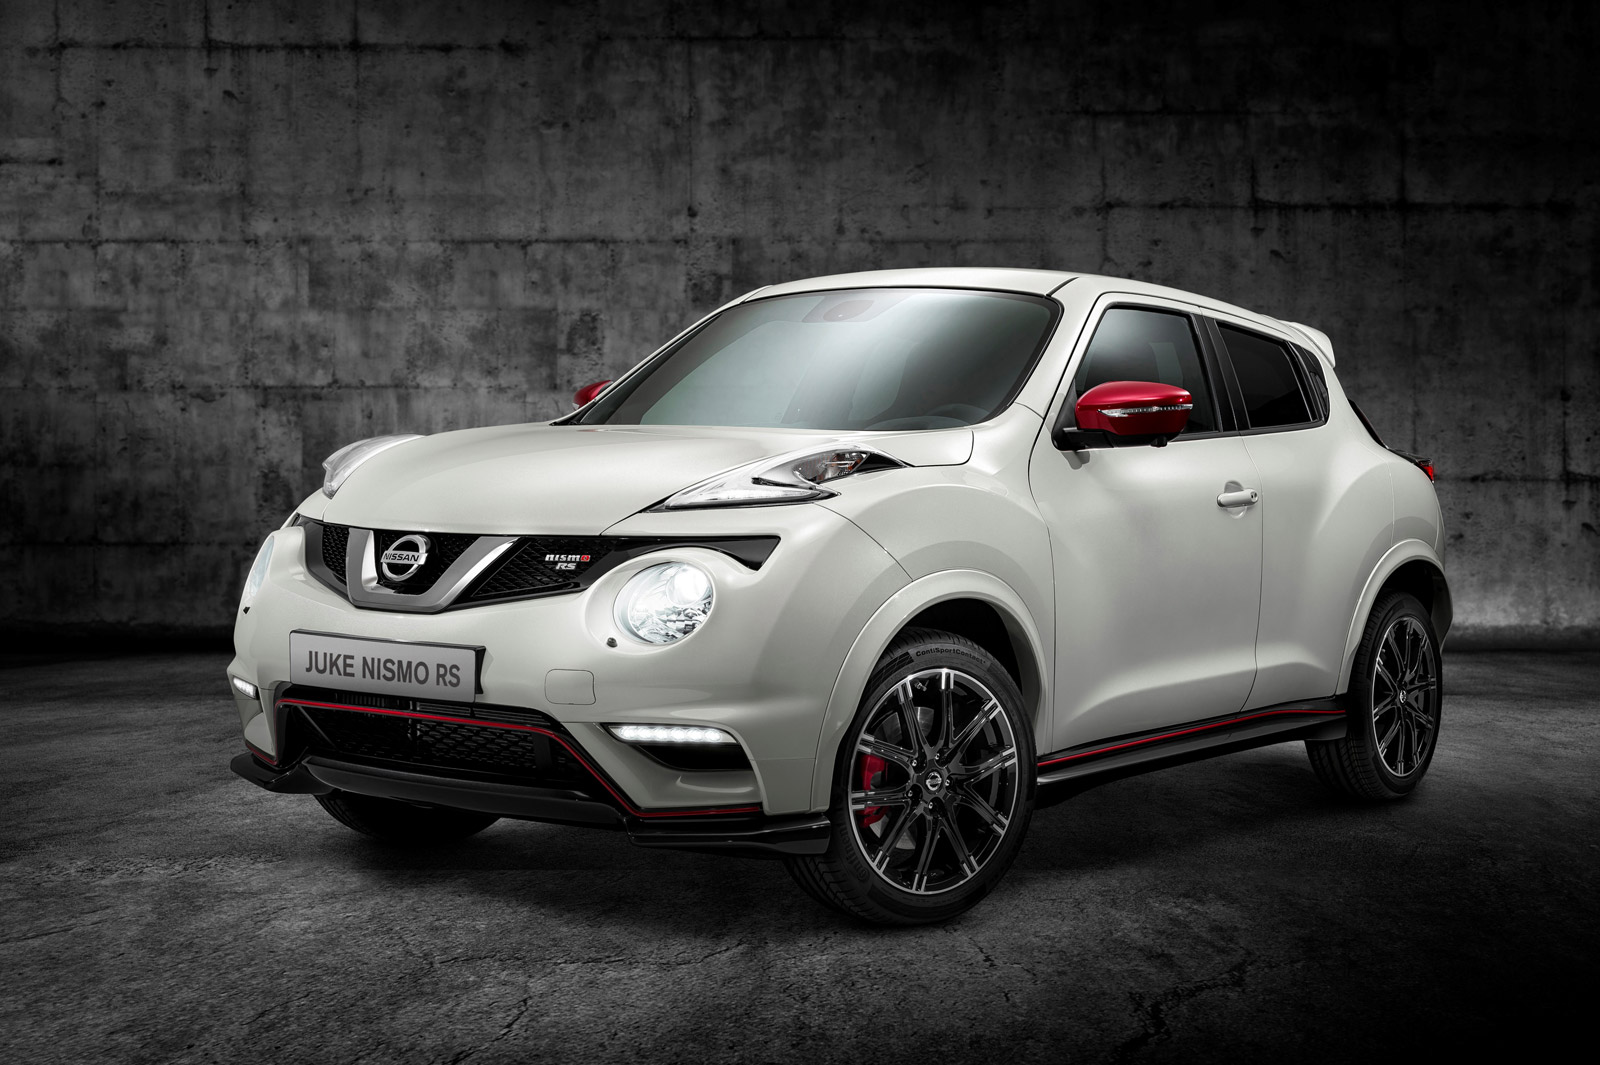 2016 Nissan Juke Research, photos, specs, and expertise